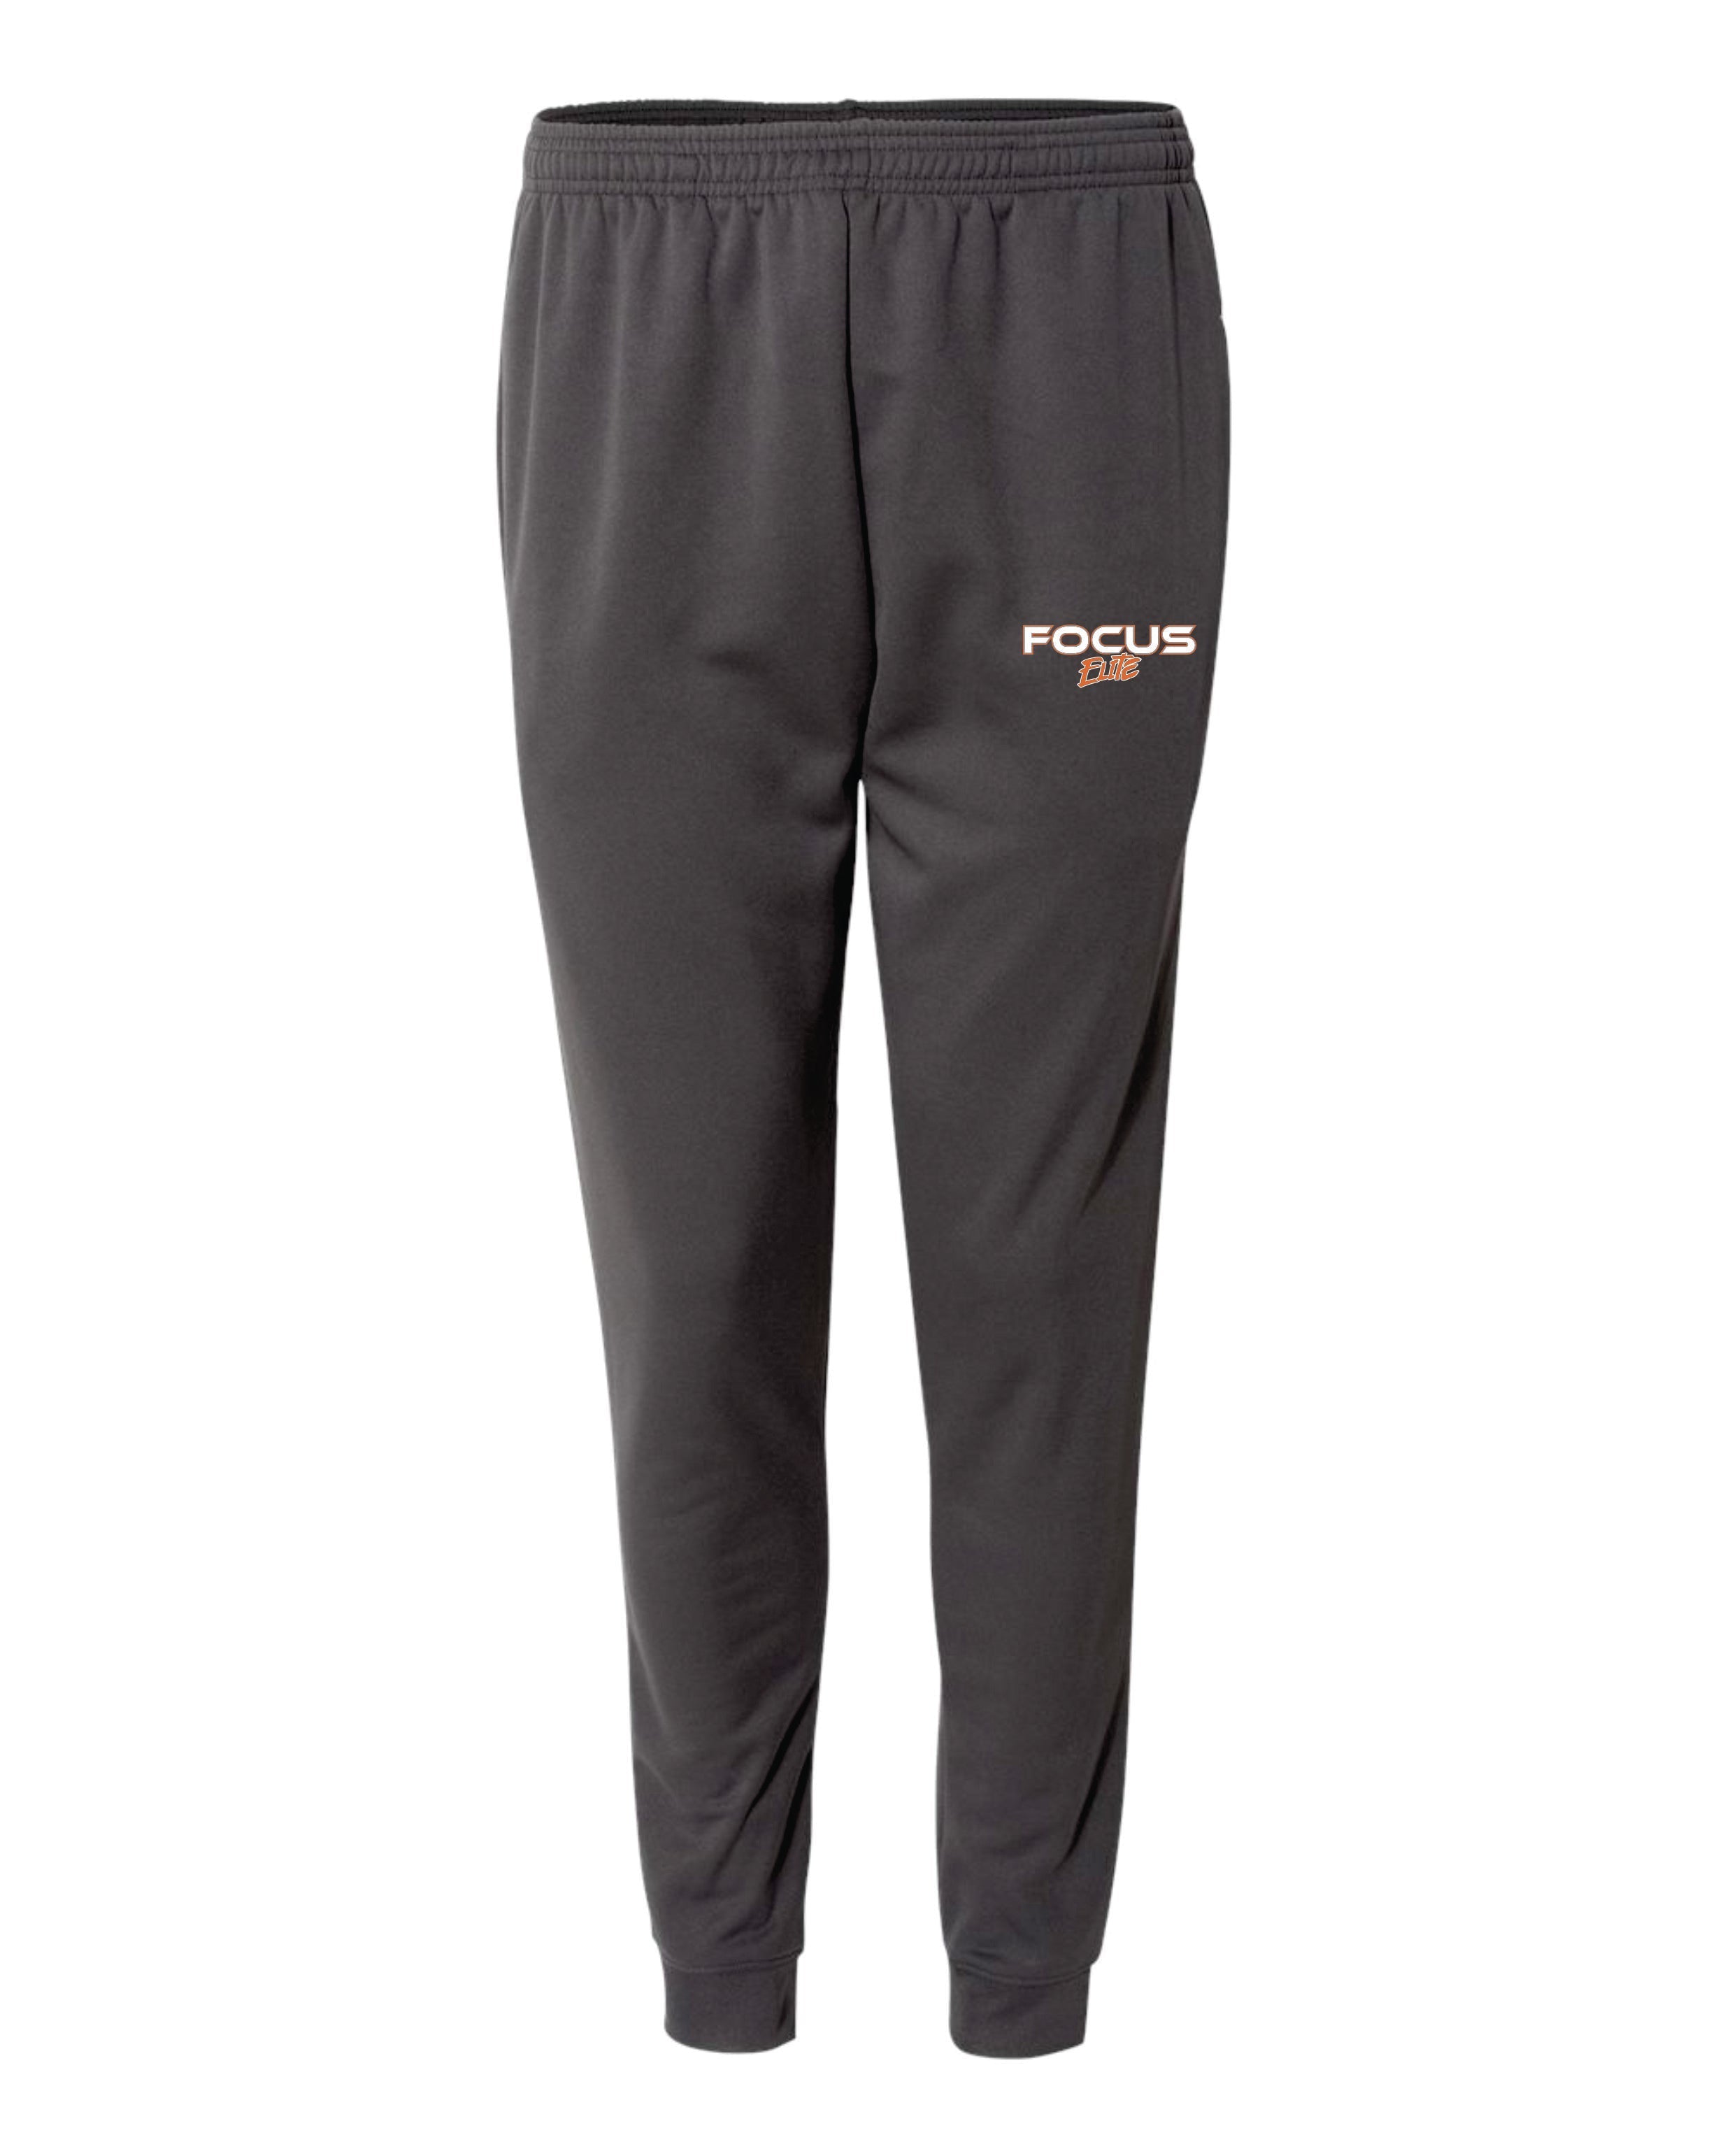 Focus Joggers by Badger - Youth